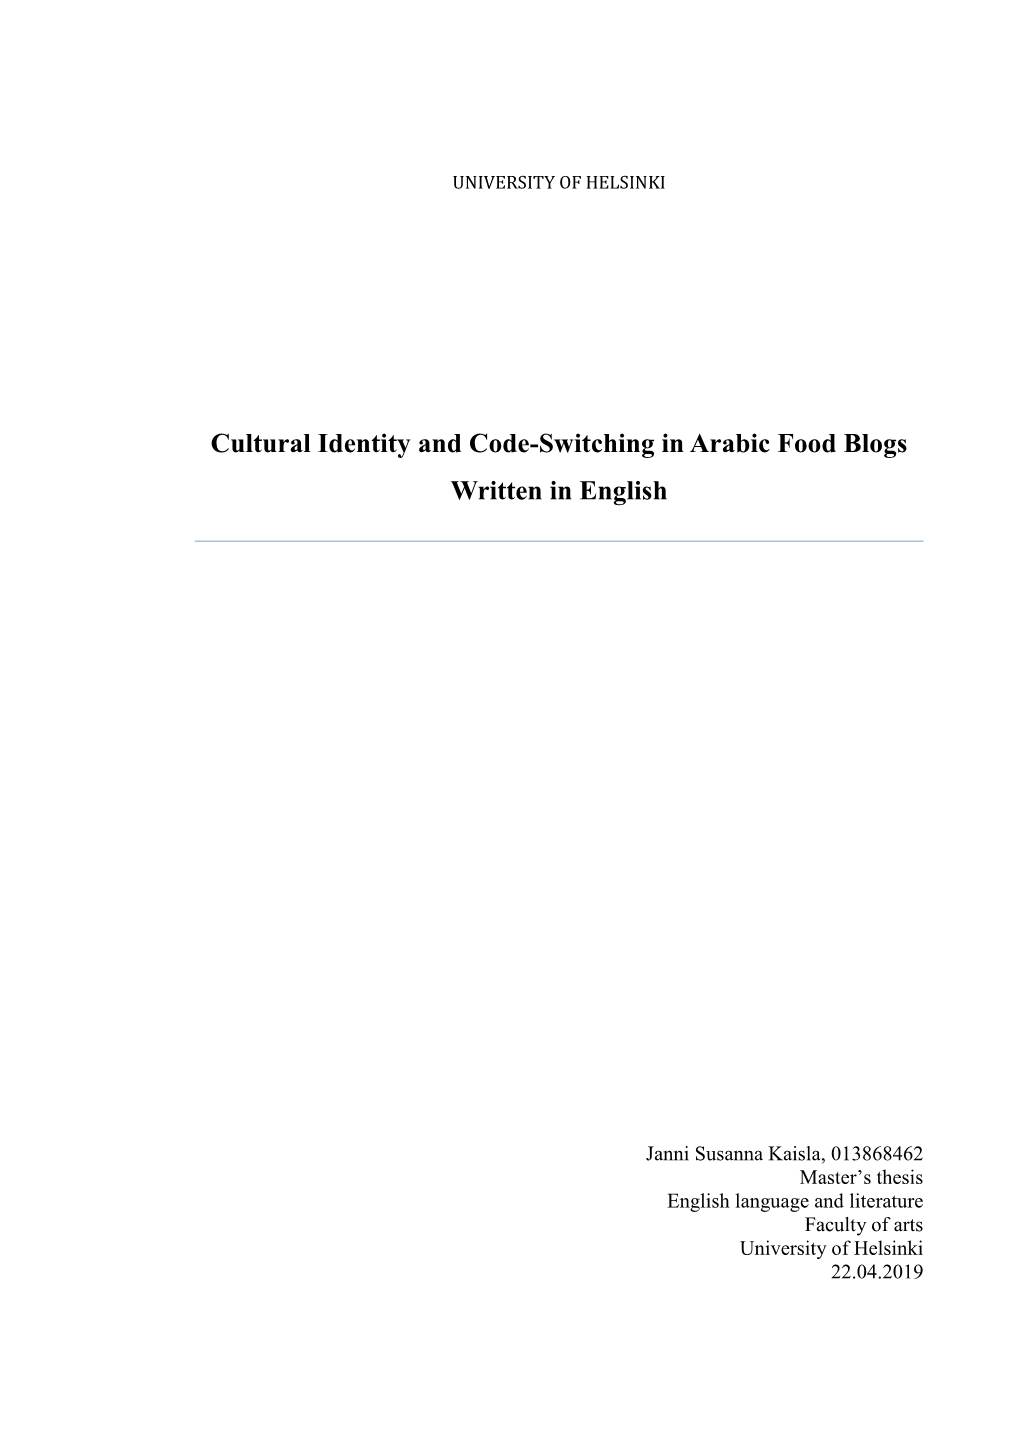 Cultural Identity and Code-Switching in Arabic Food Blogs Written in English